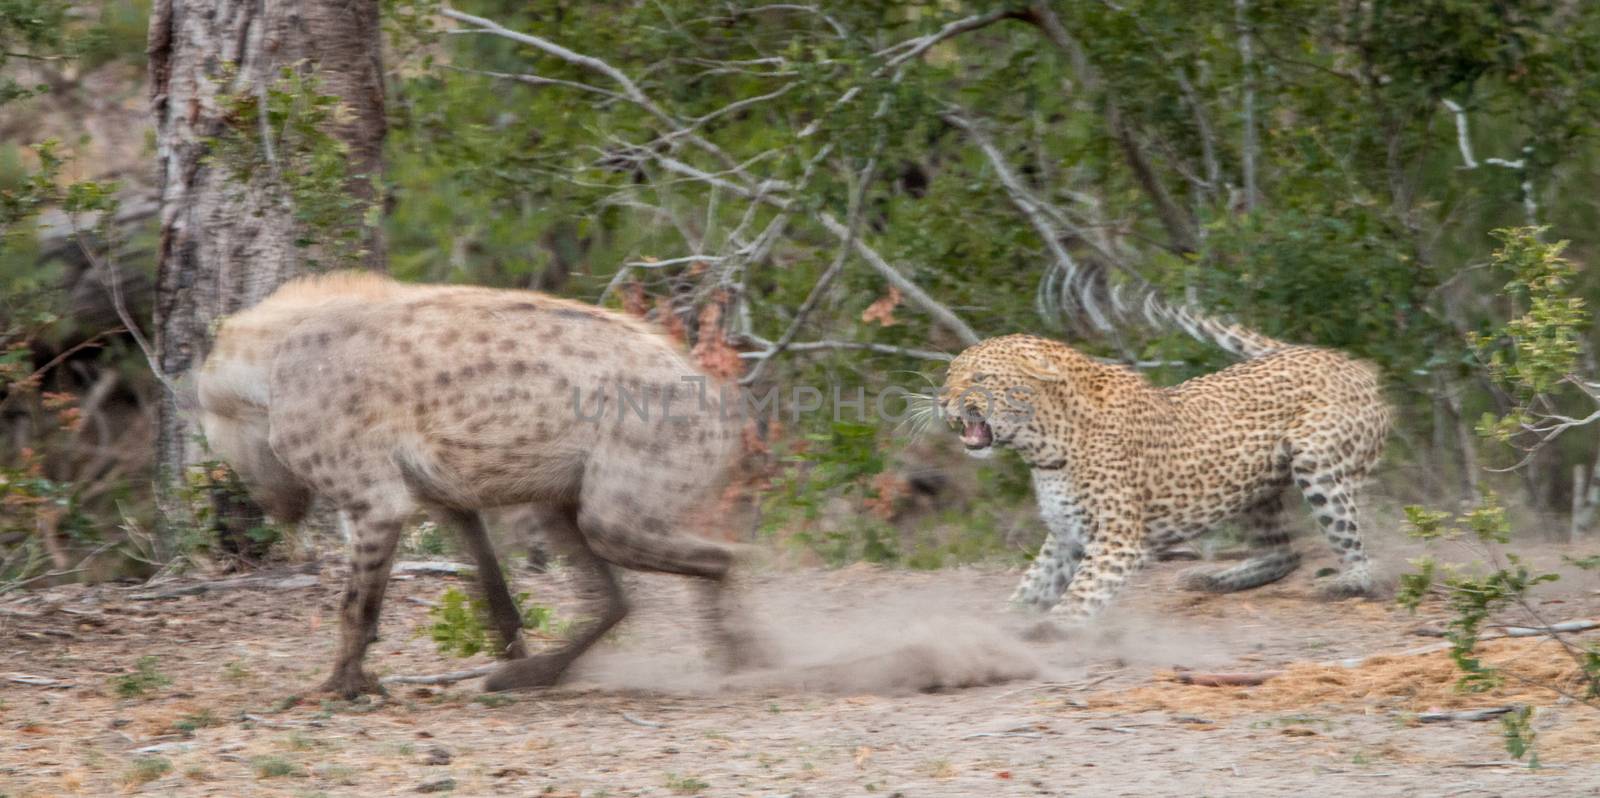 Leopard chasing away a Spotted hyena in the Kruger National Park by Simoneemanphotography